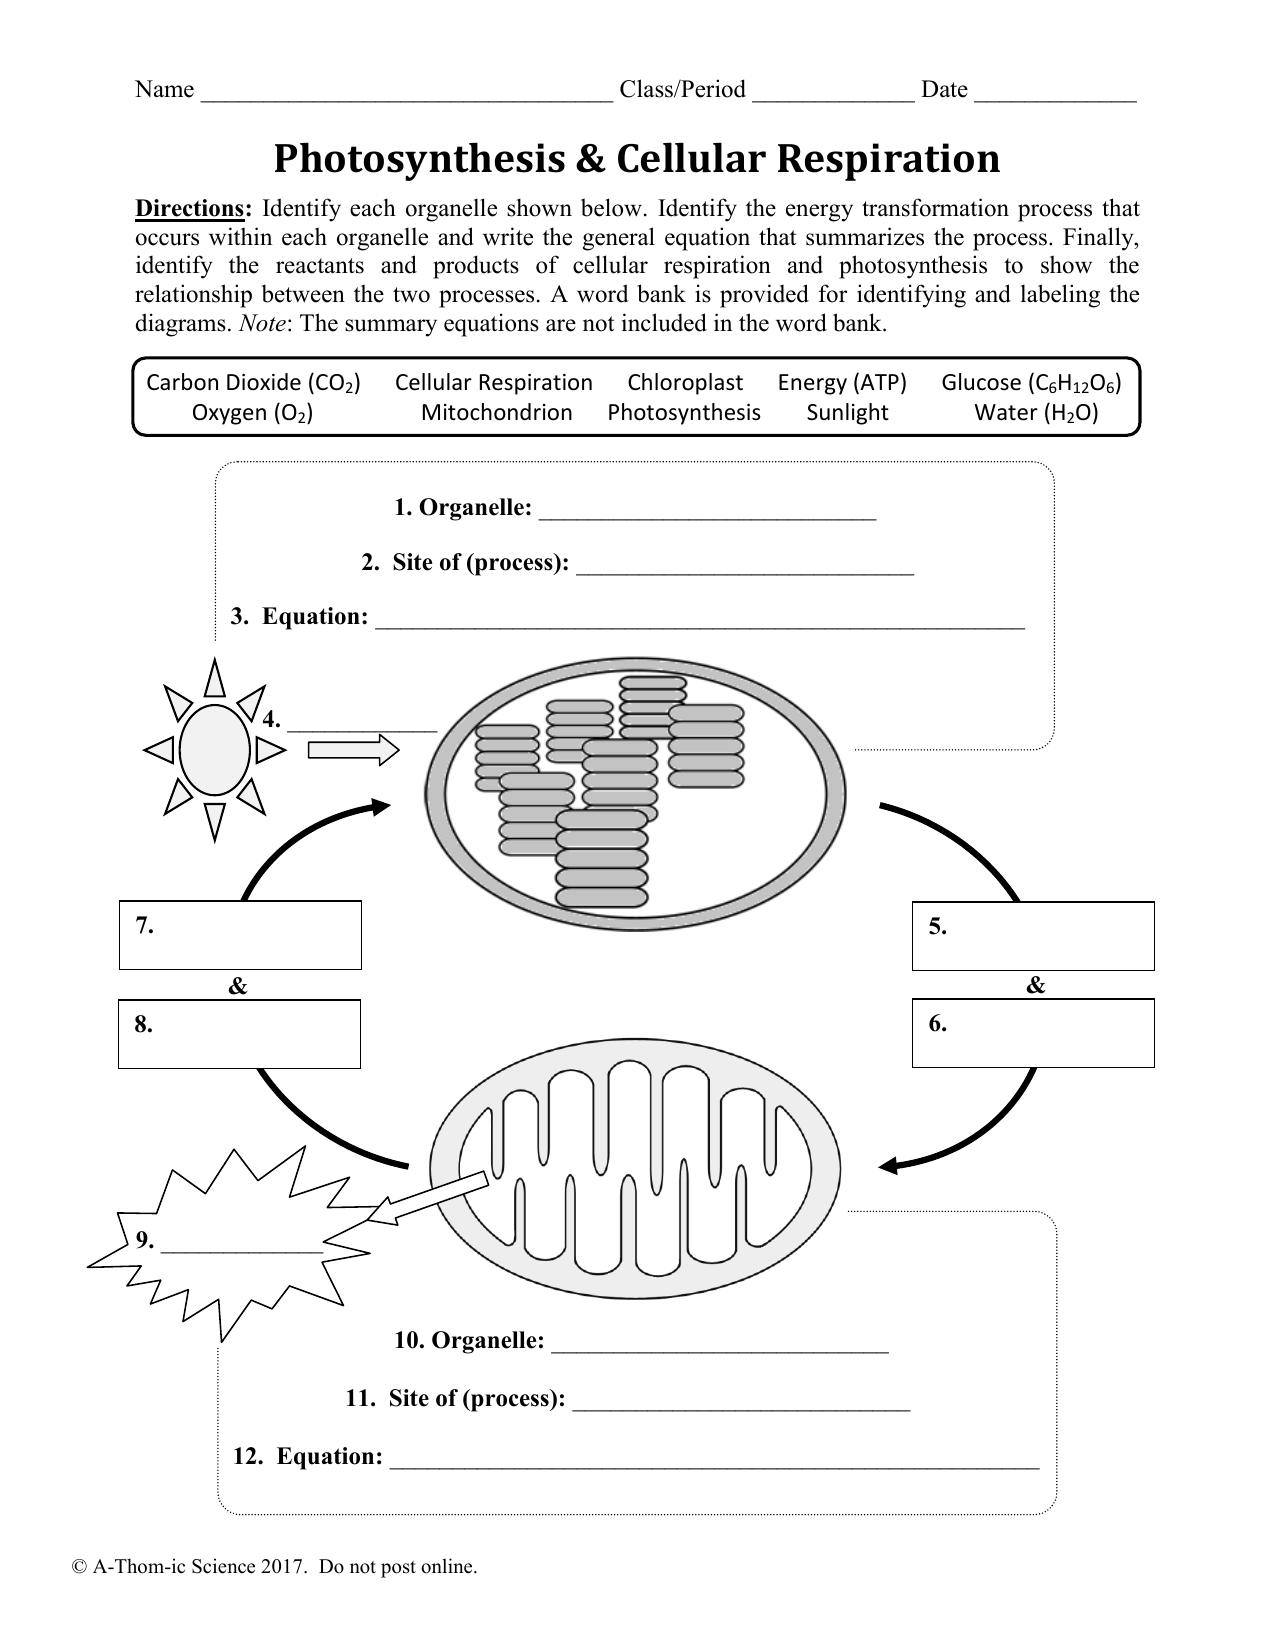 photosynthesis-simulation-worksheet-discover-our-best-answer-key-complete-guide-and-collection